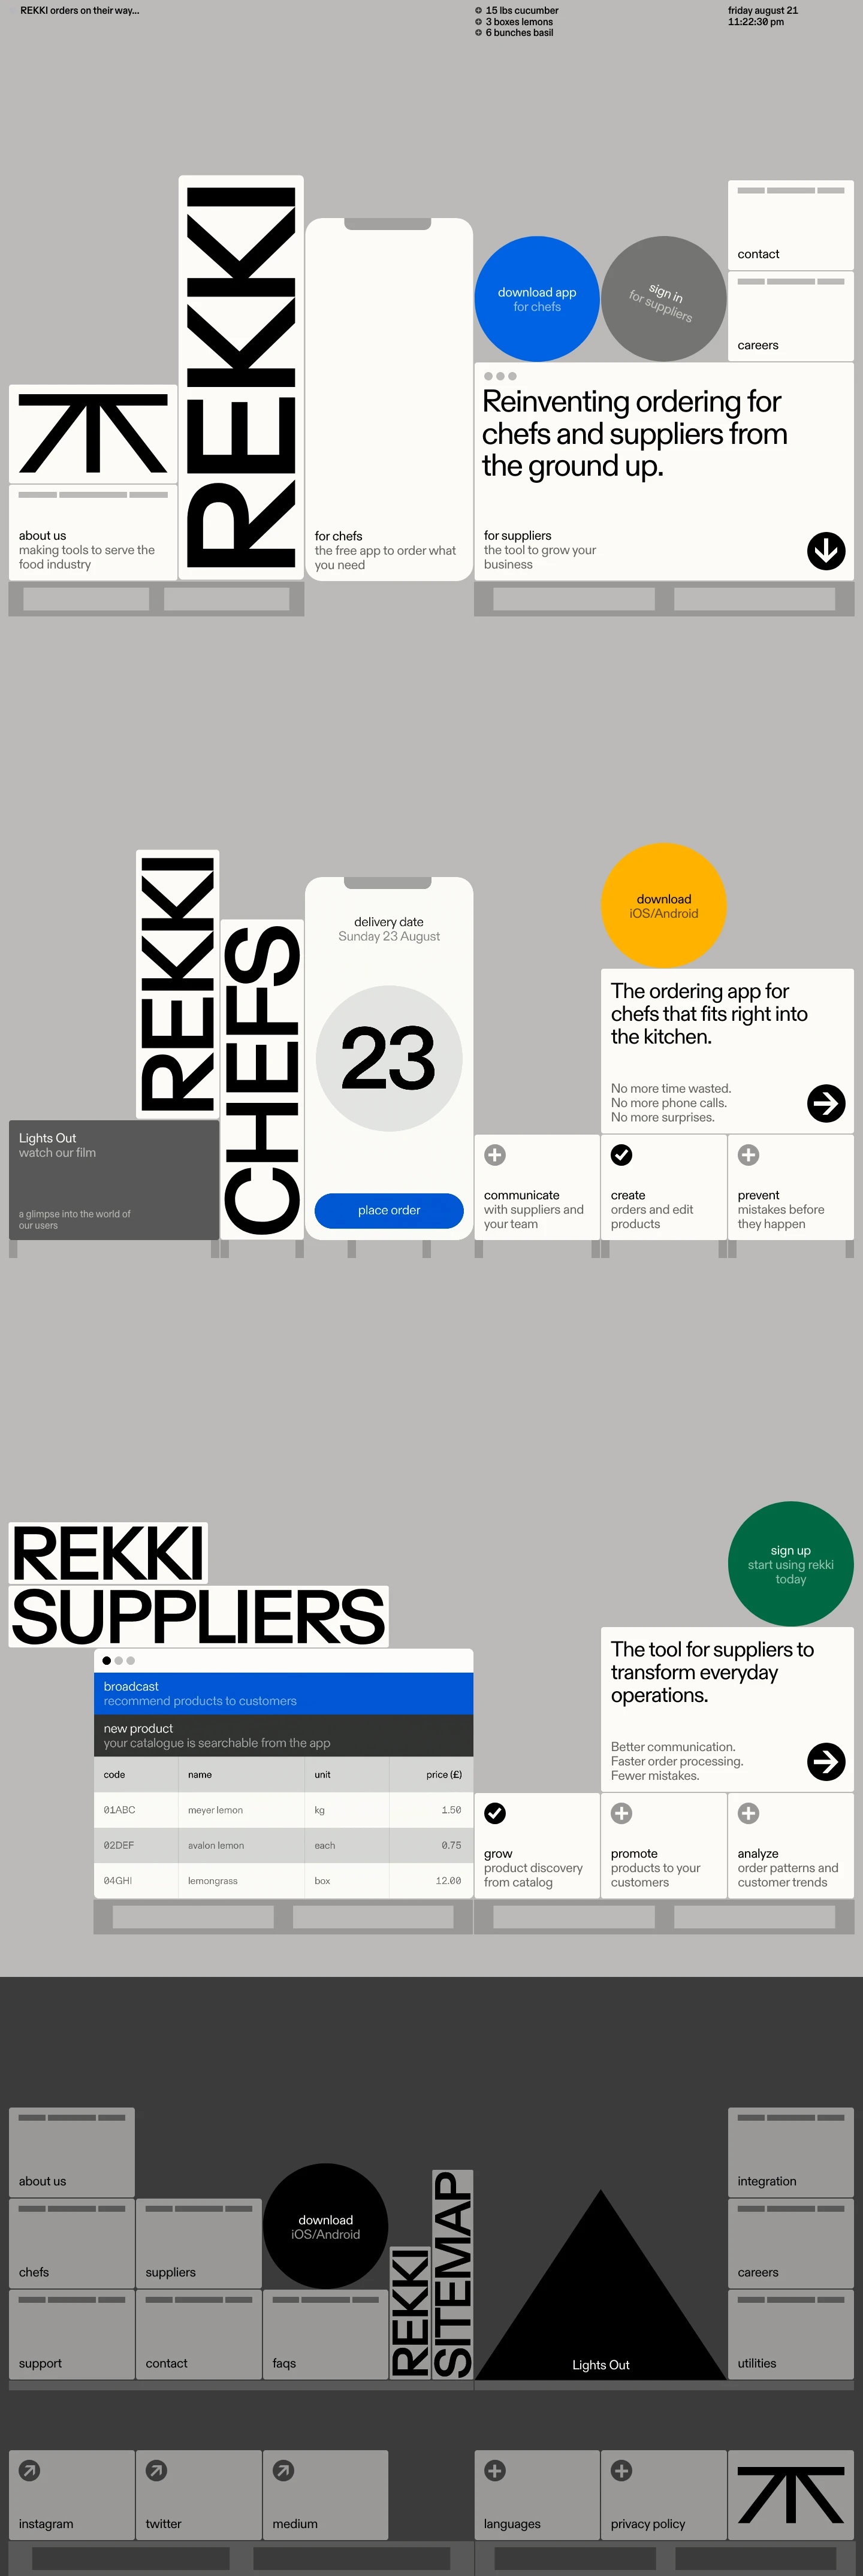 REKKI Landing Page Example: REKKI's free app and tool are changing the way restaurants and wholesalers communicate. We're reinventing ordering for chefs and suppliers from the ground up. 